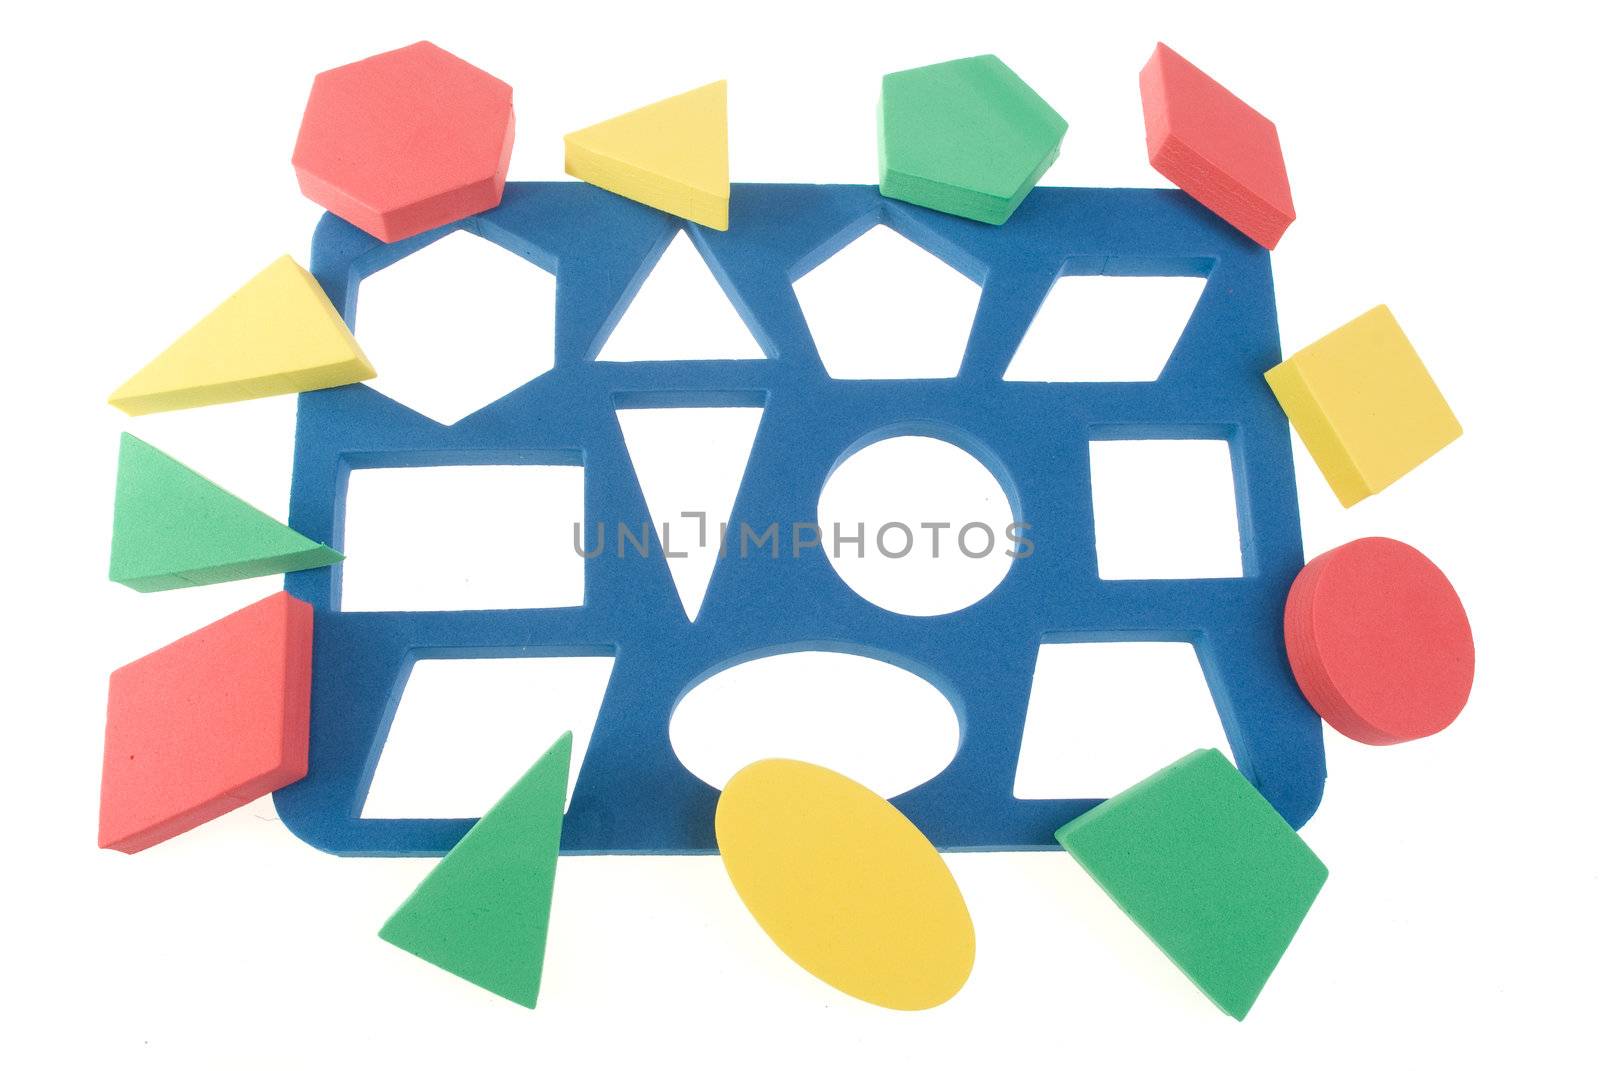 Children's game with color geometric shapes